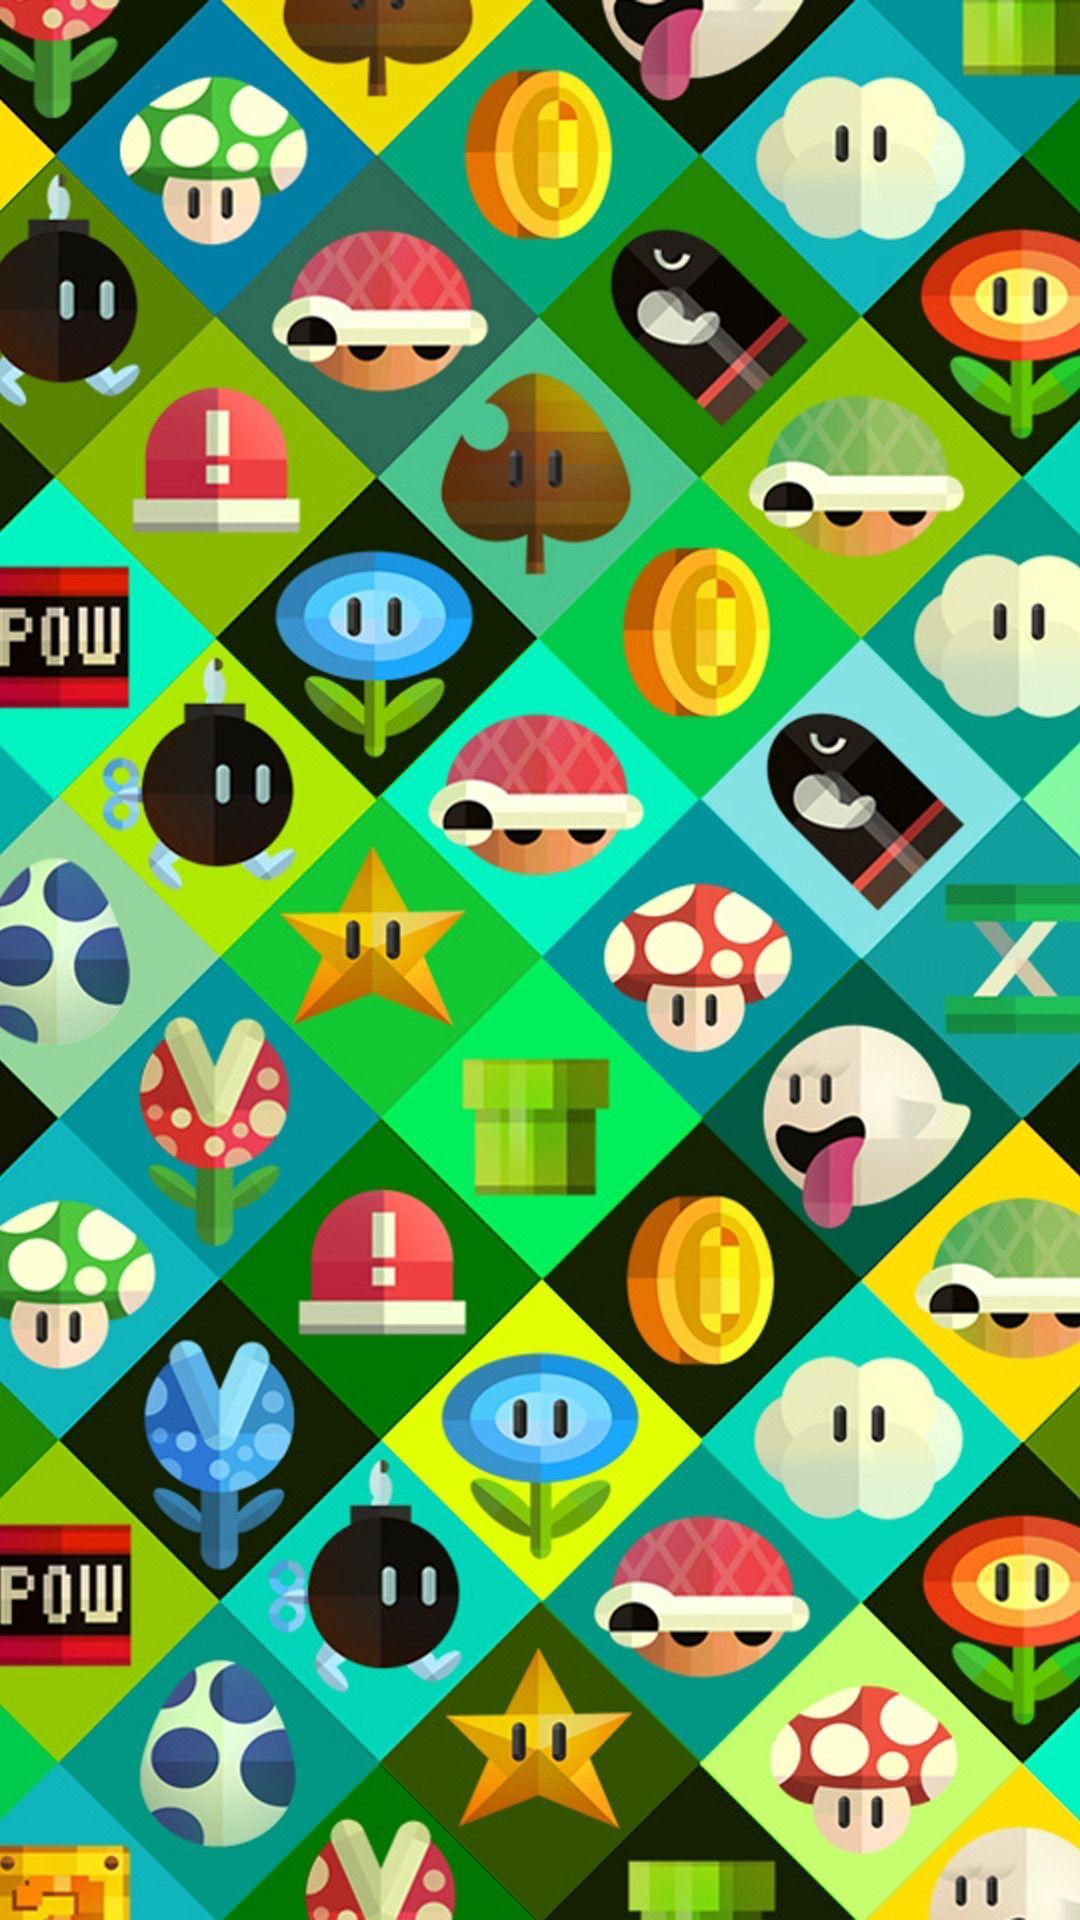 Wallpaper Wednesday 5 Super MarioThemed Wallpapers for iPhone